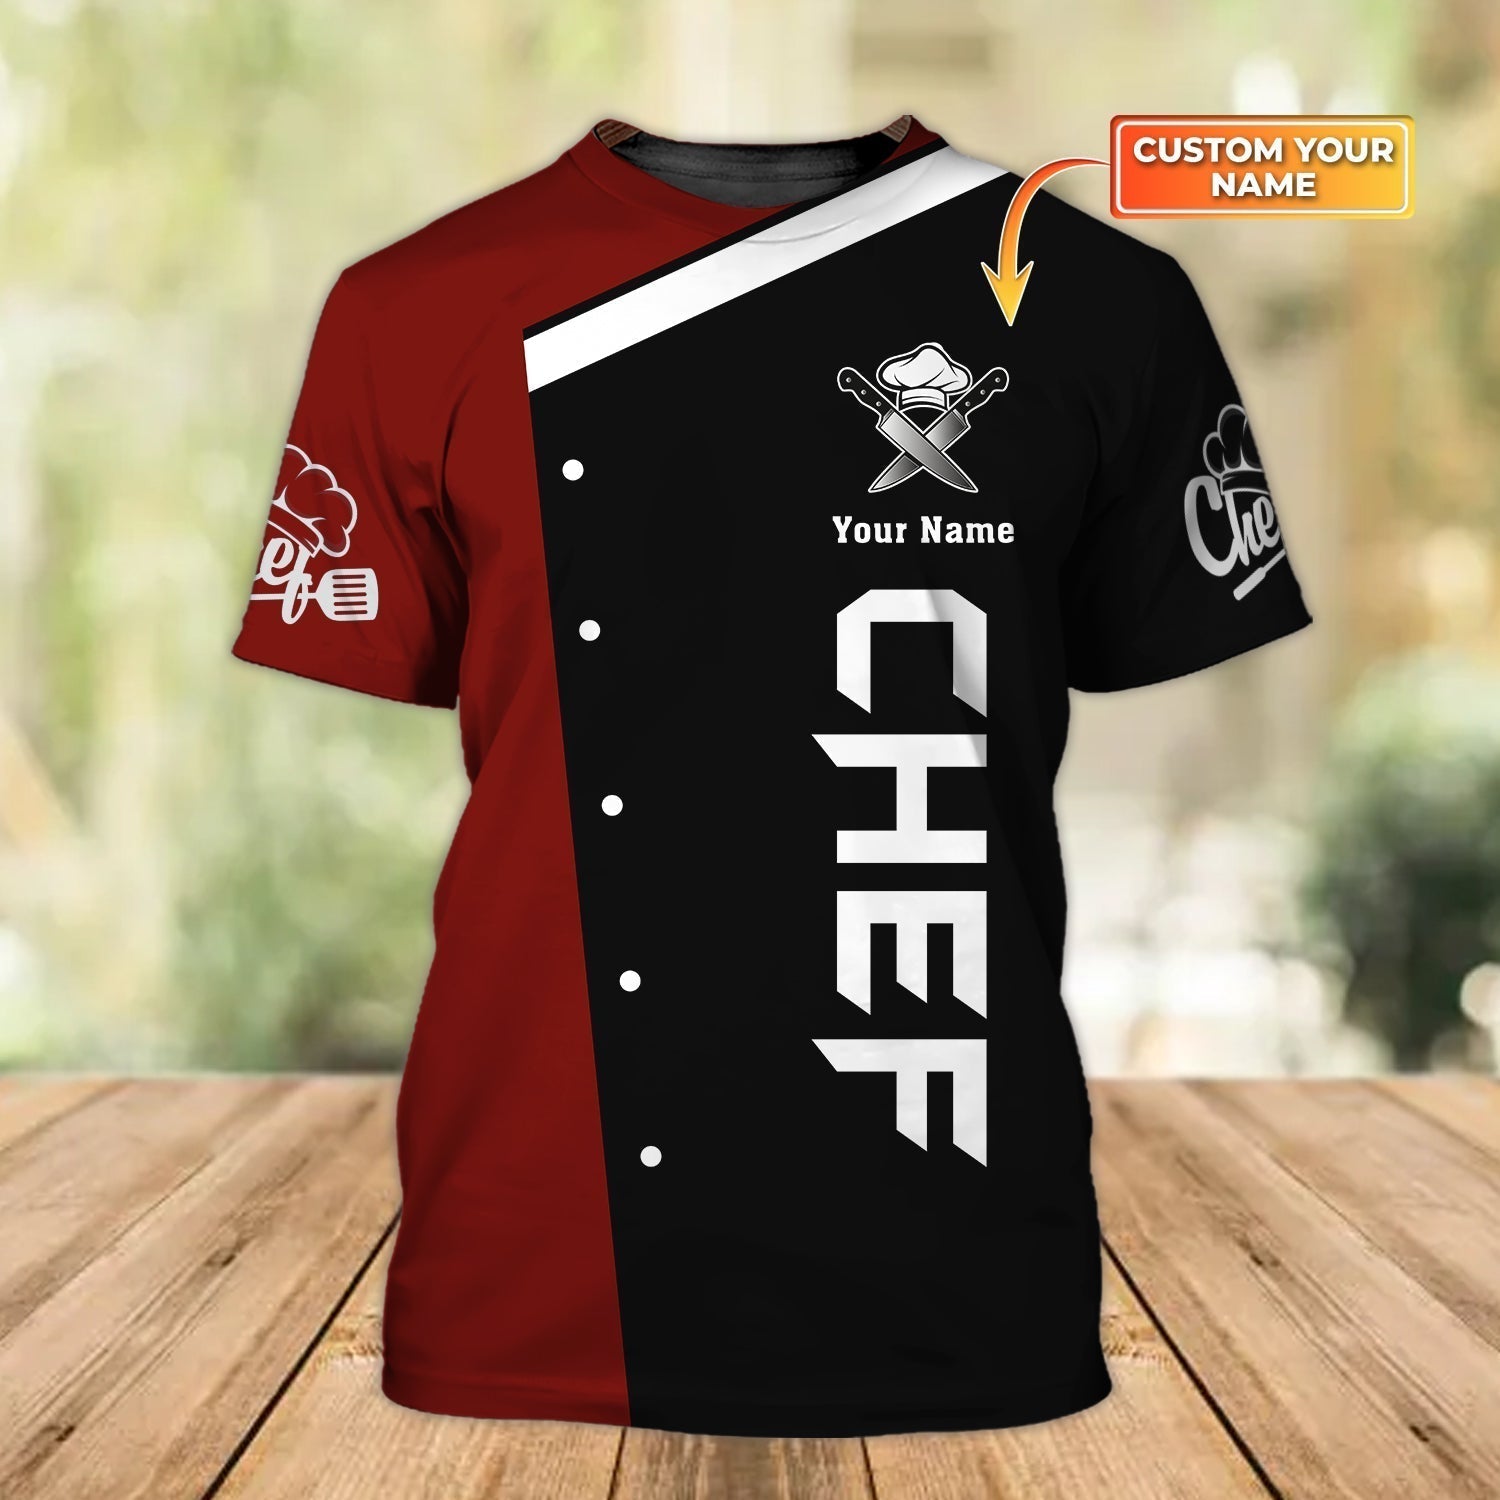 Personalized Name 3D Chef Shirt Black & Red Master Chef Uniform